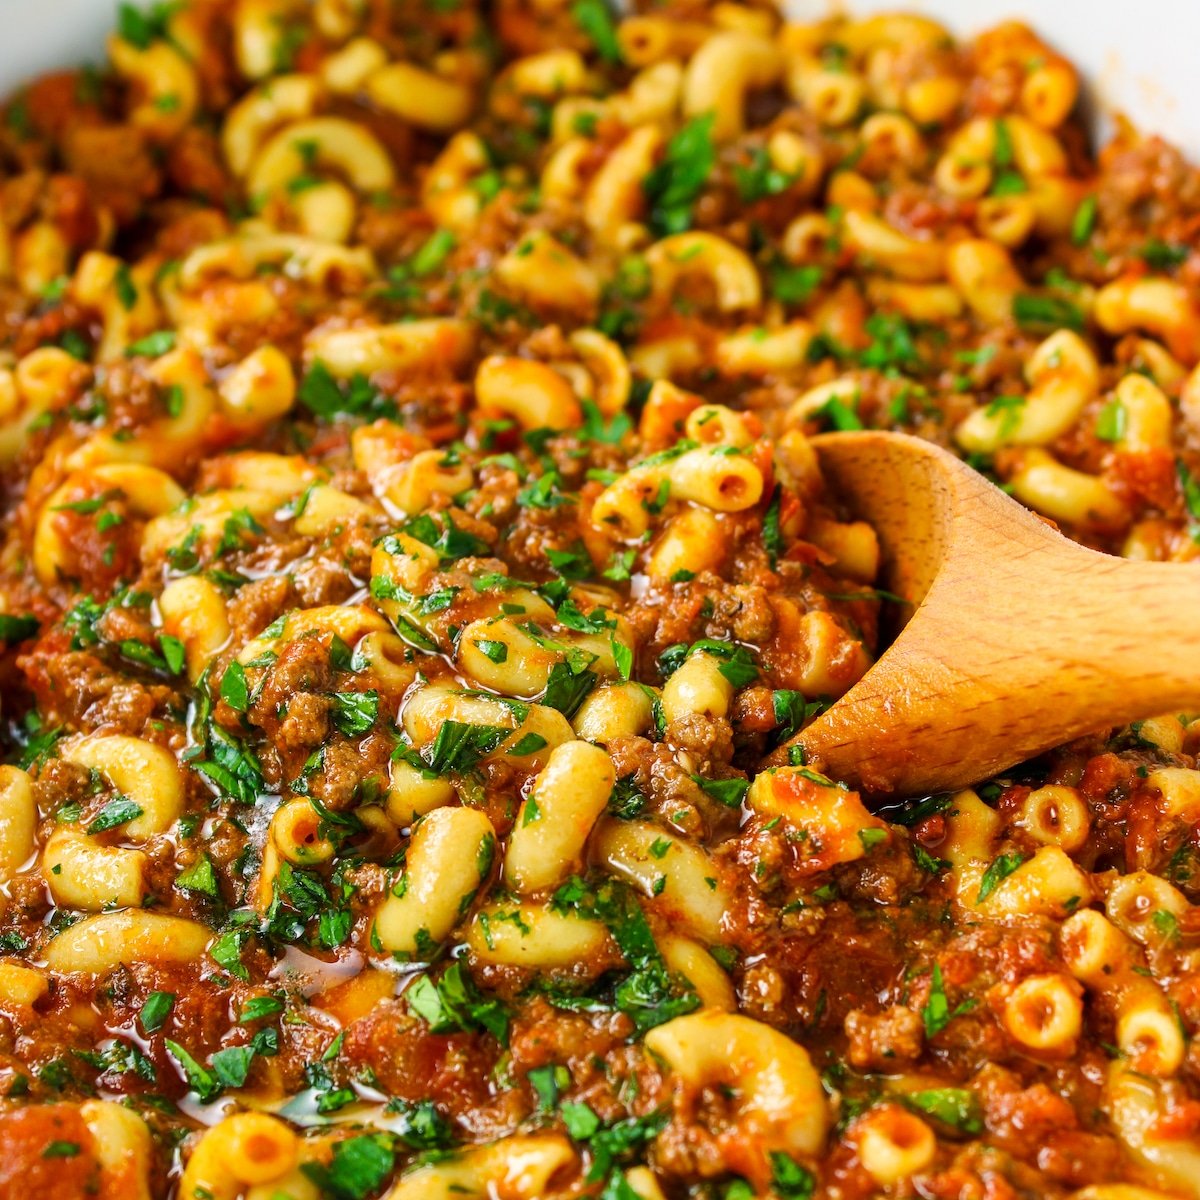 Crock pot goulash with spinach - LIFE, CREATIVELY ORGANIZED